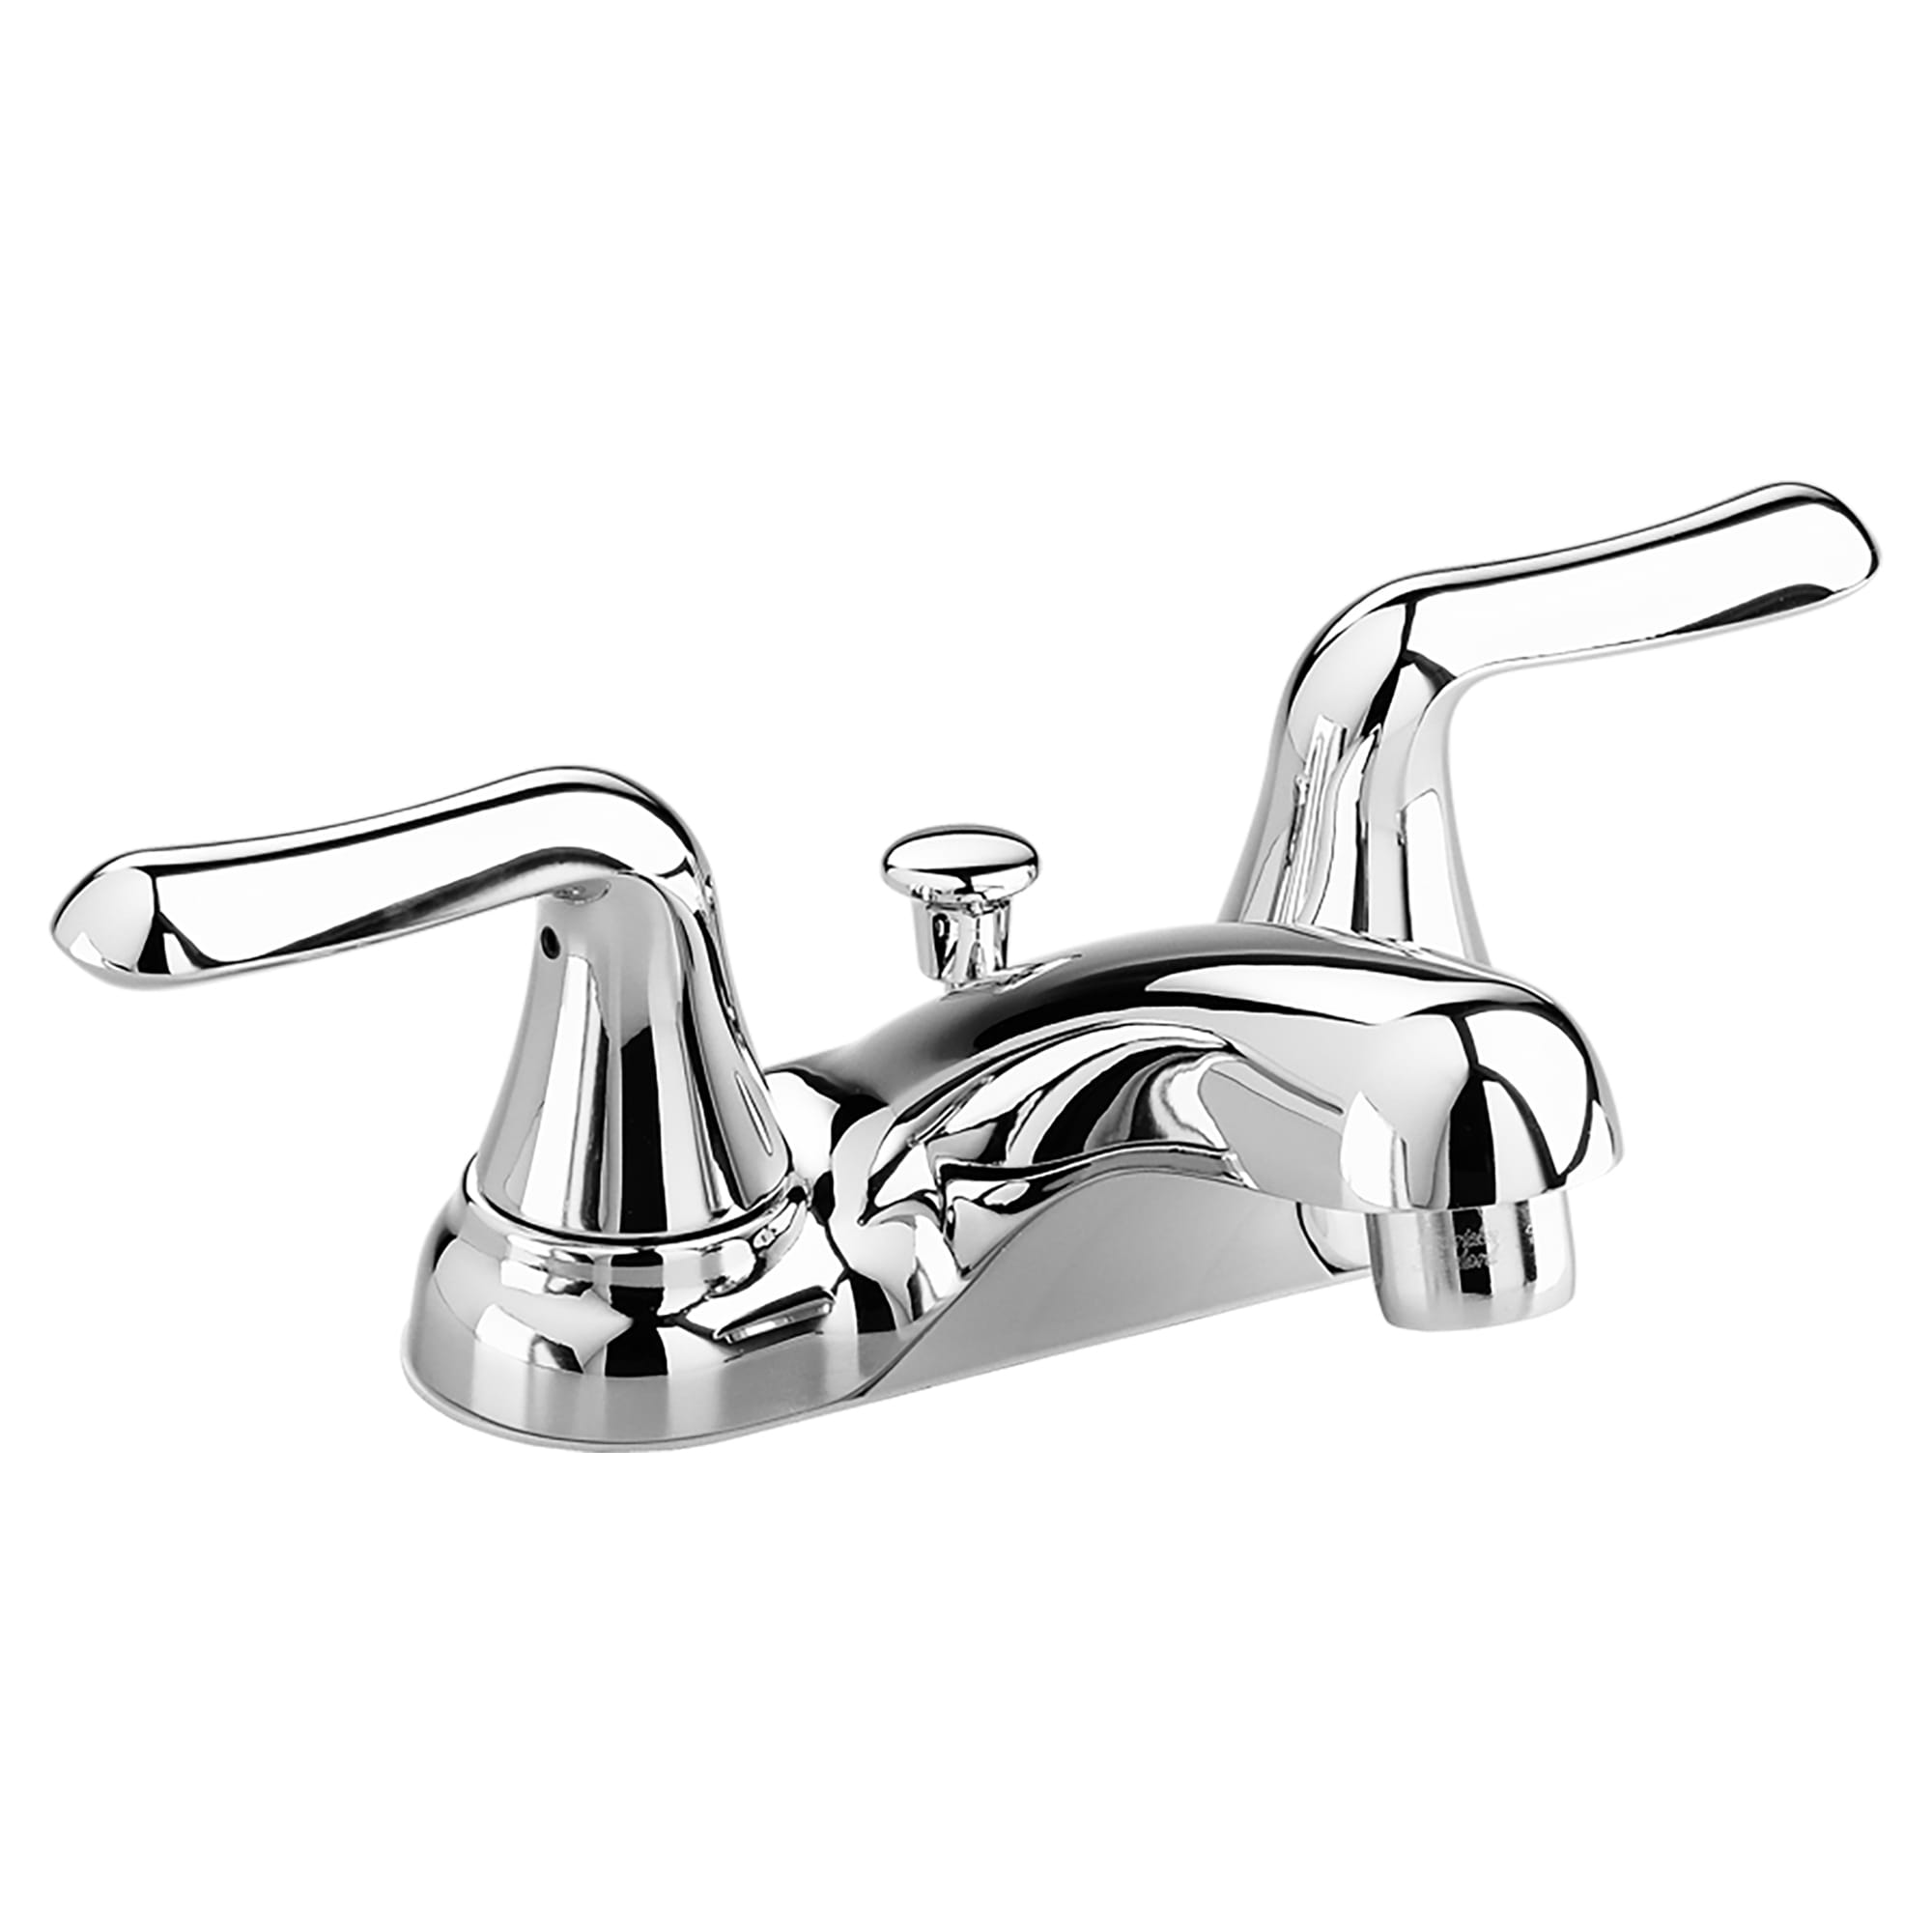 Colony® Soft 4-Inch Centerset 2-Handle Bathroom Faucet 1.2 gpm/4.5 L/min With Lever Handles